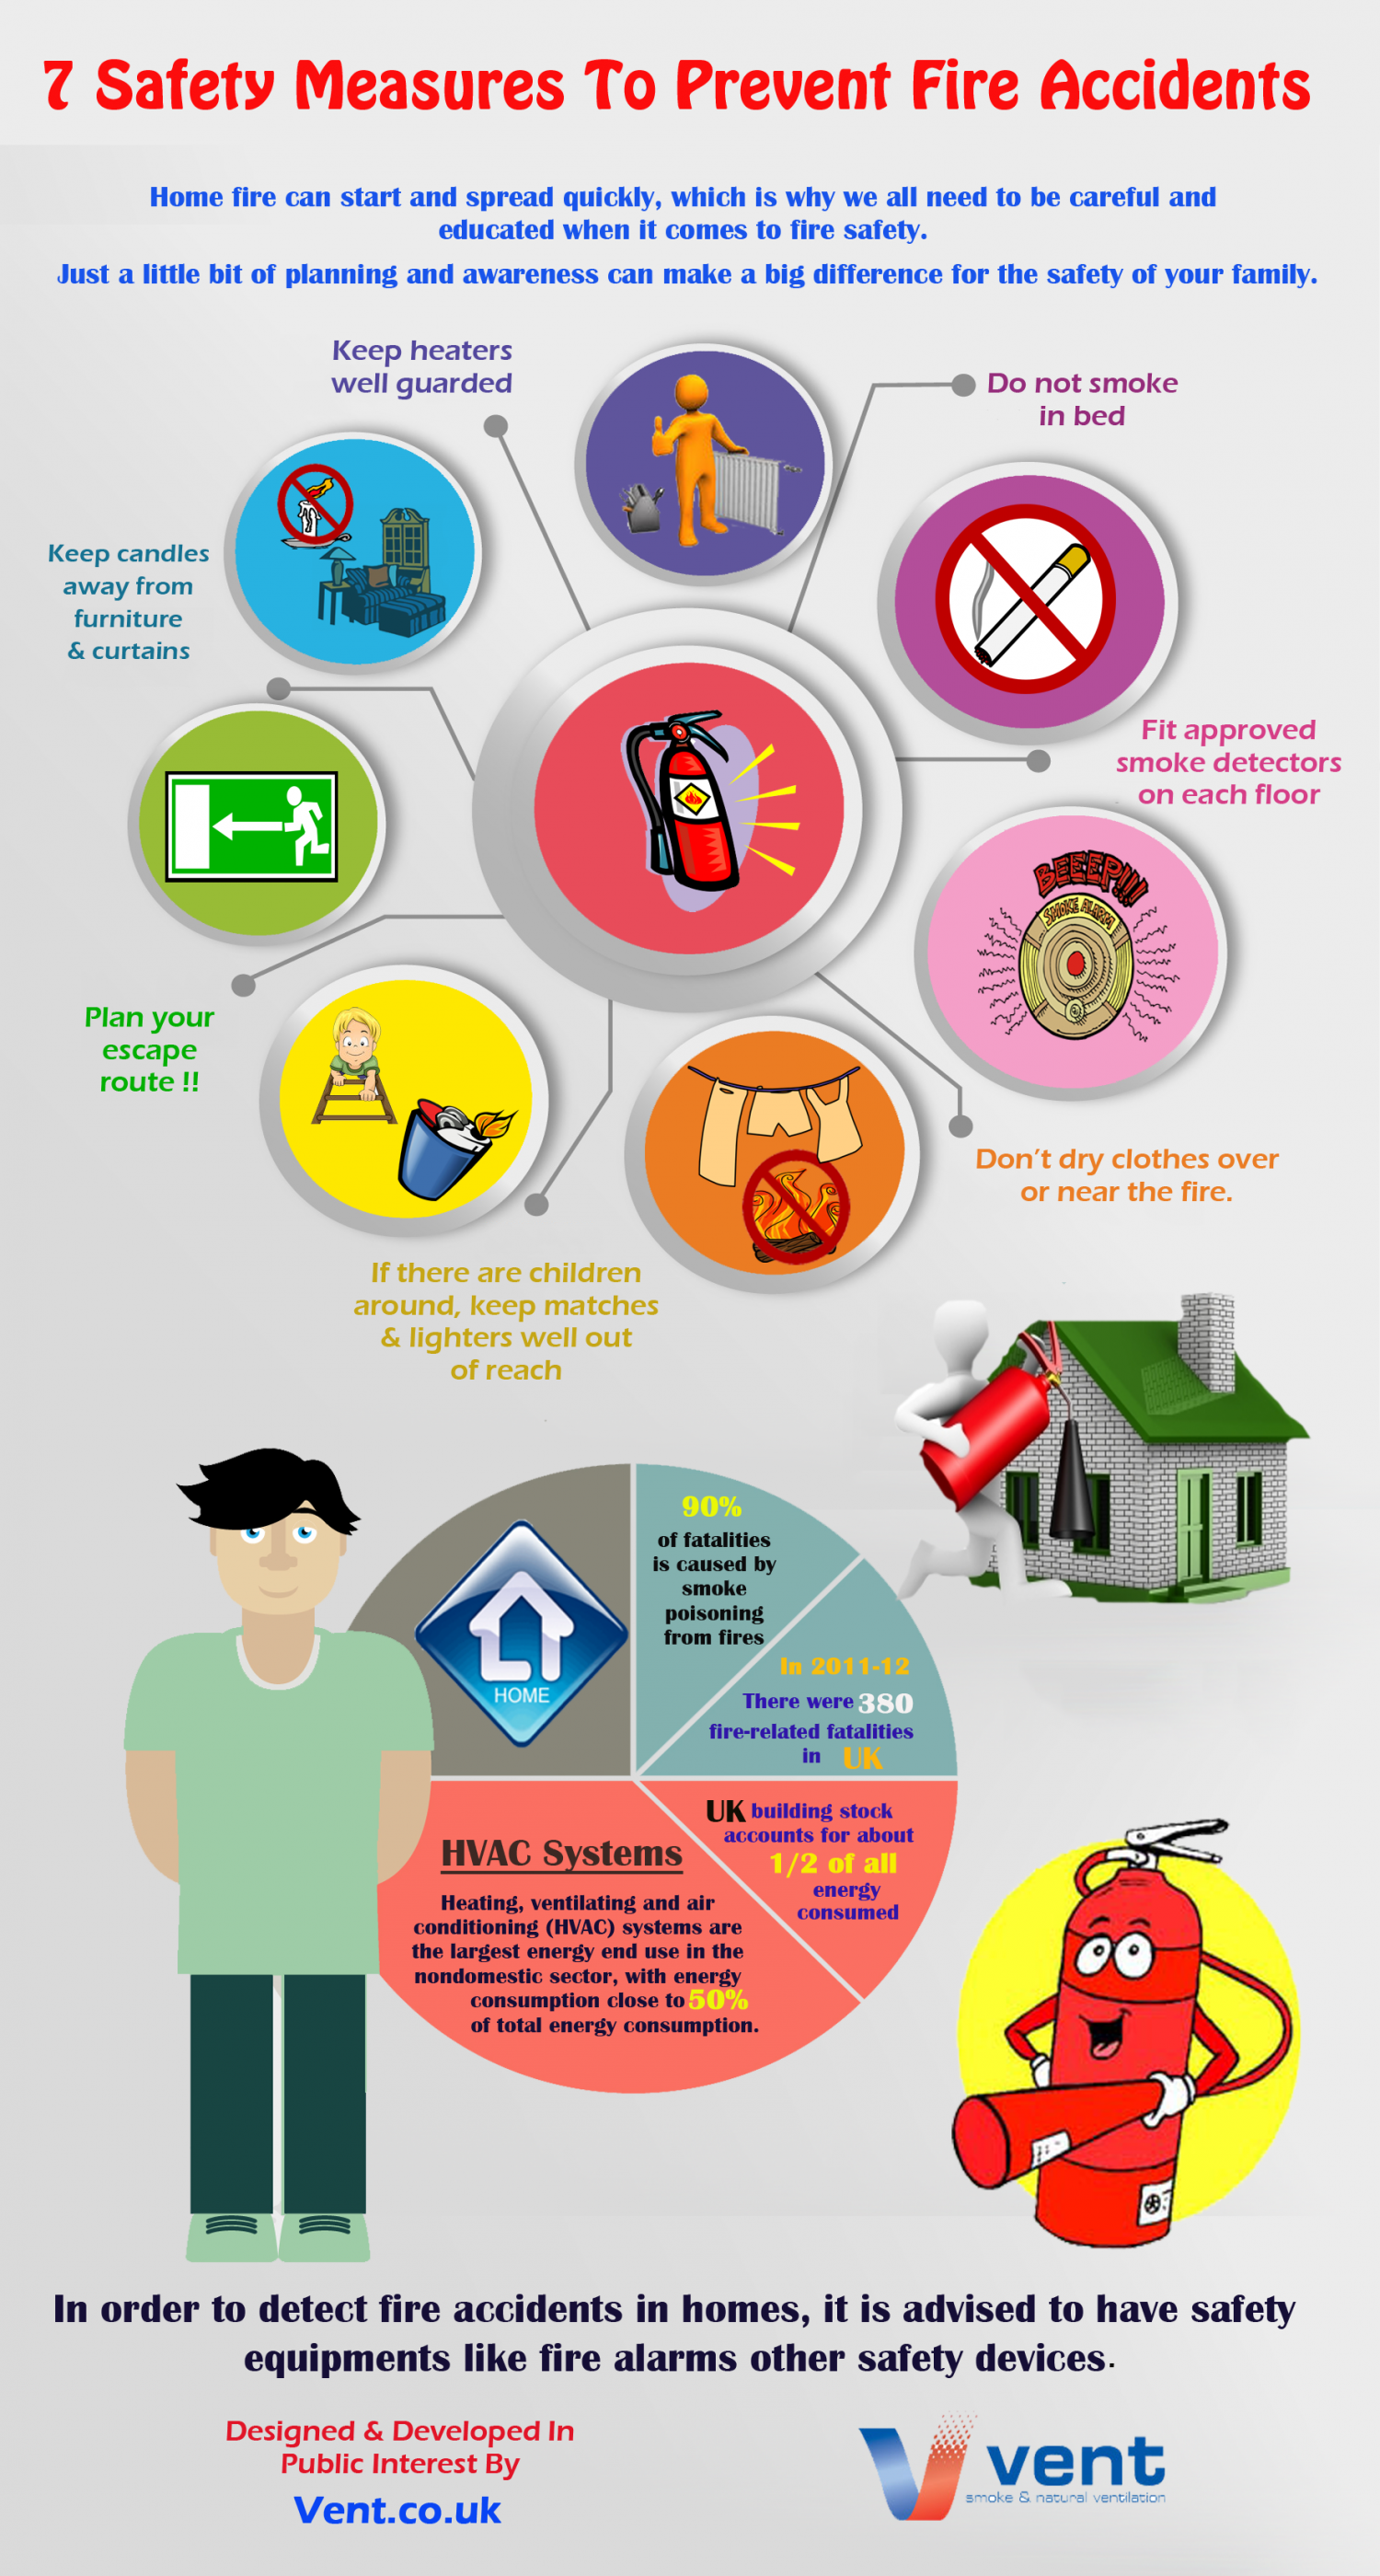 Tips To Prevent Fire Accidents In Home